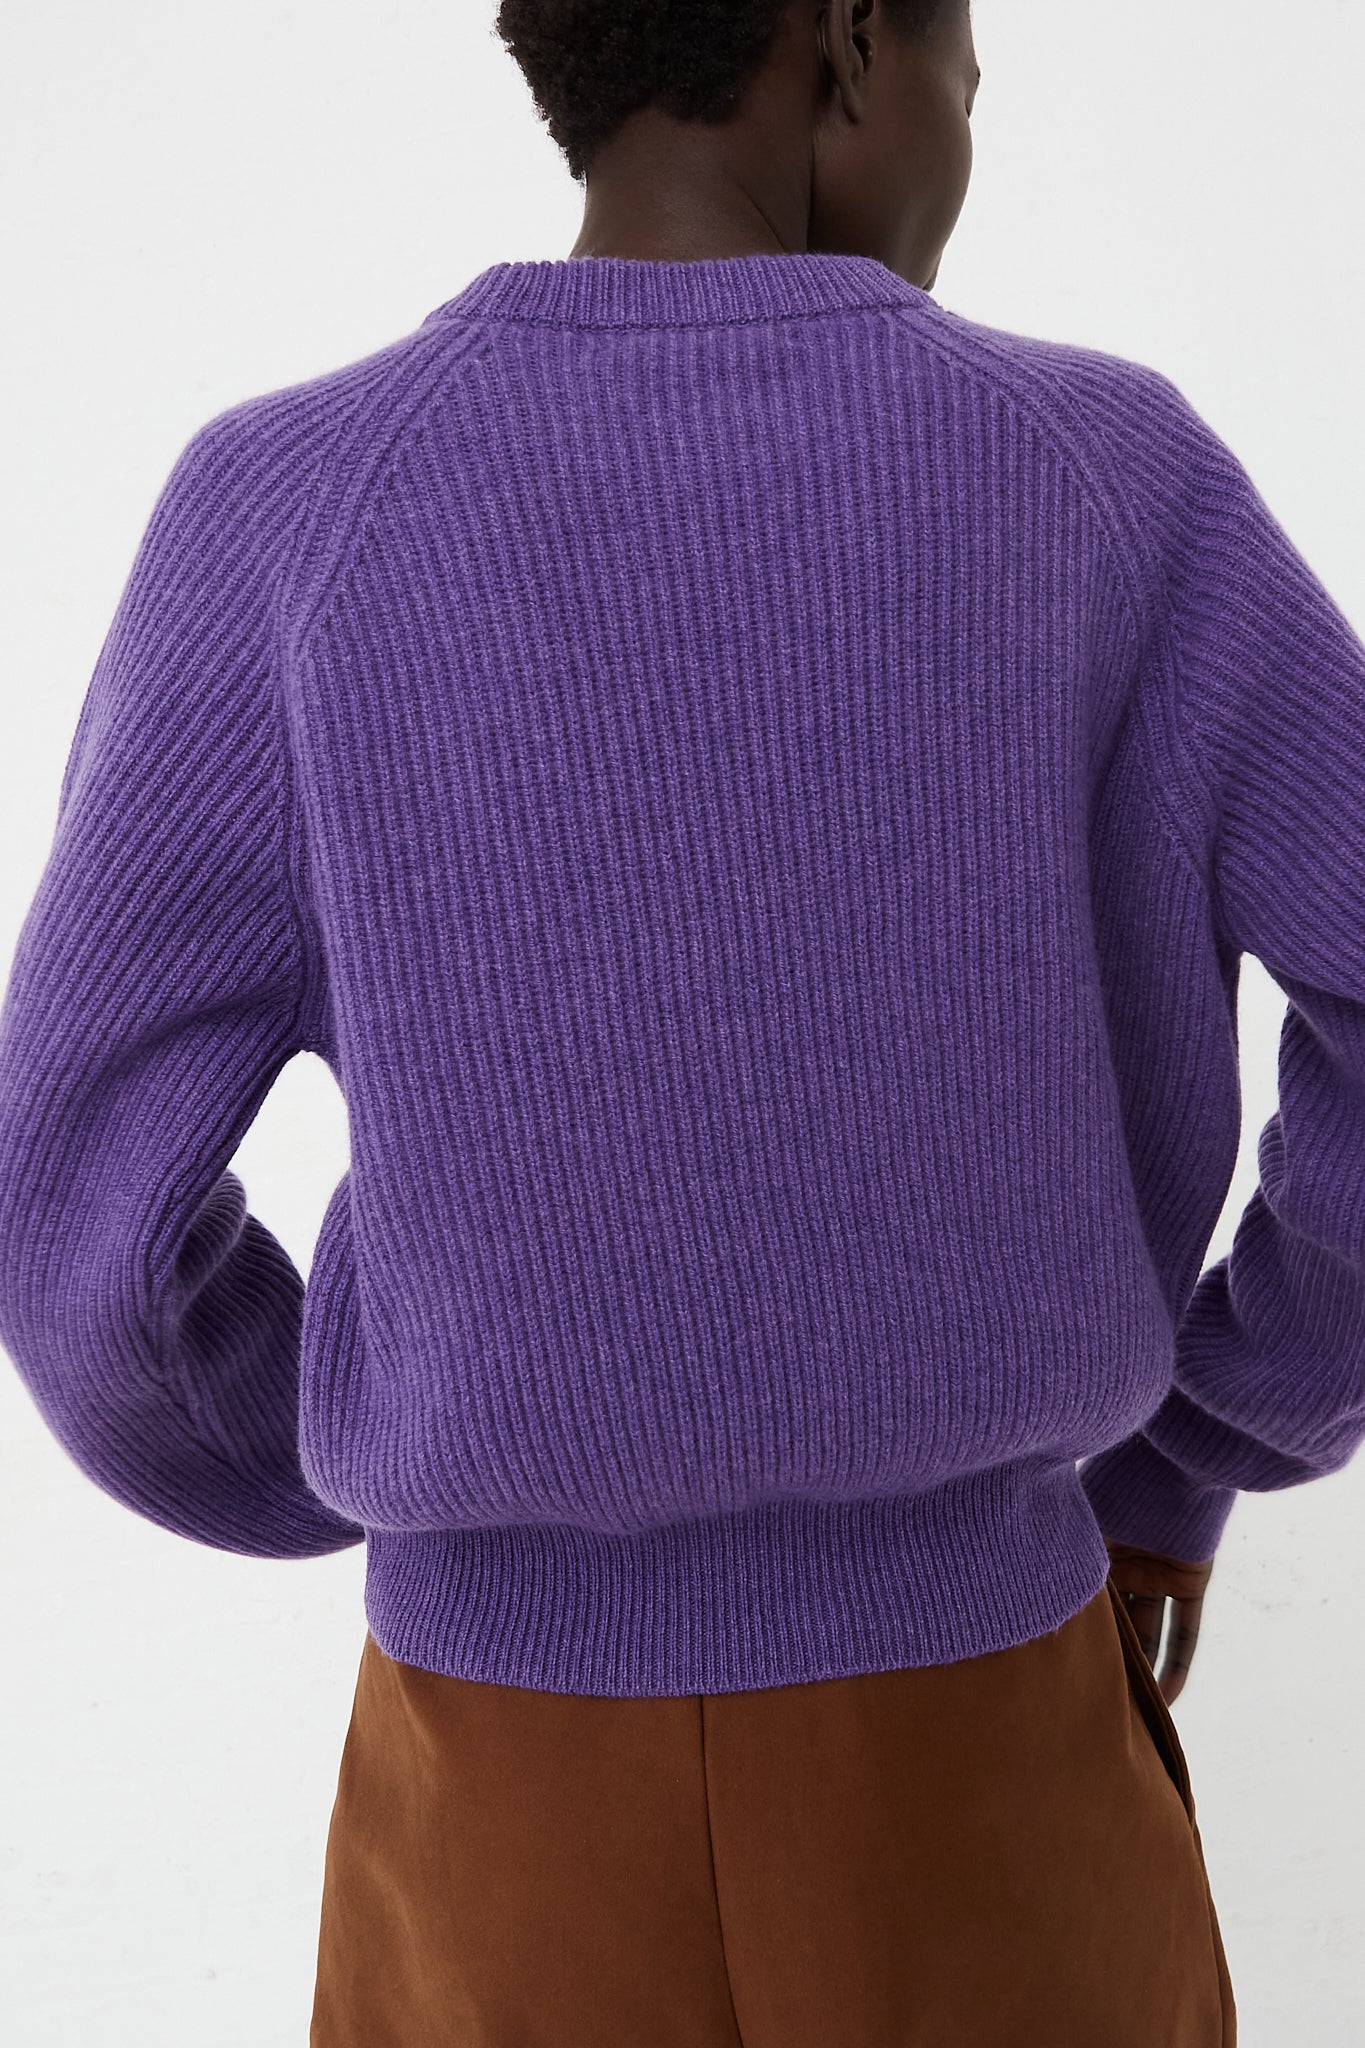 Ribbed Raglan Cashmere Cropped Sweater Purple by CristaSeya for Oroboro Back